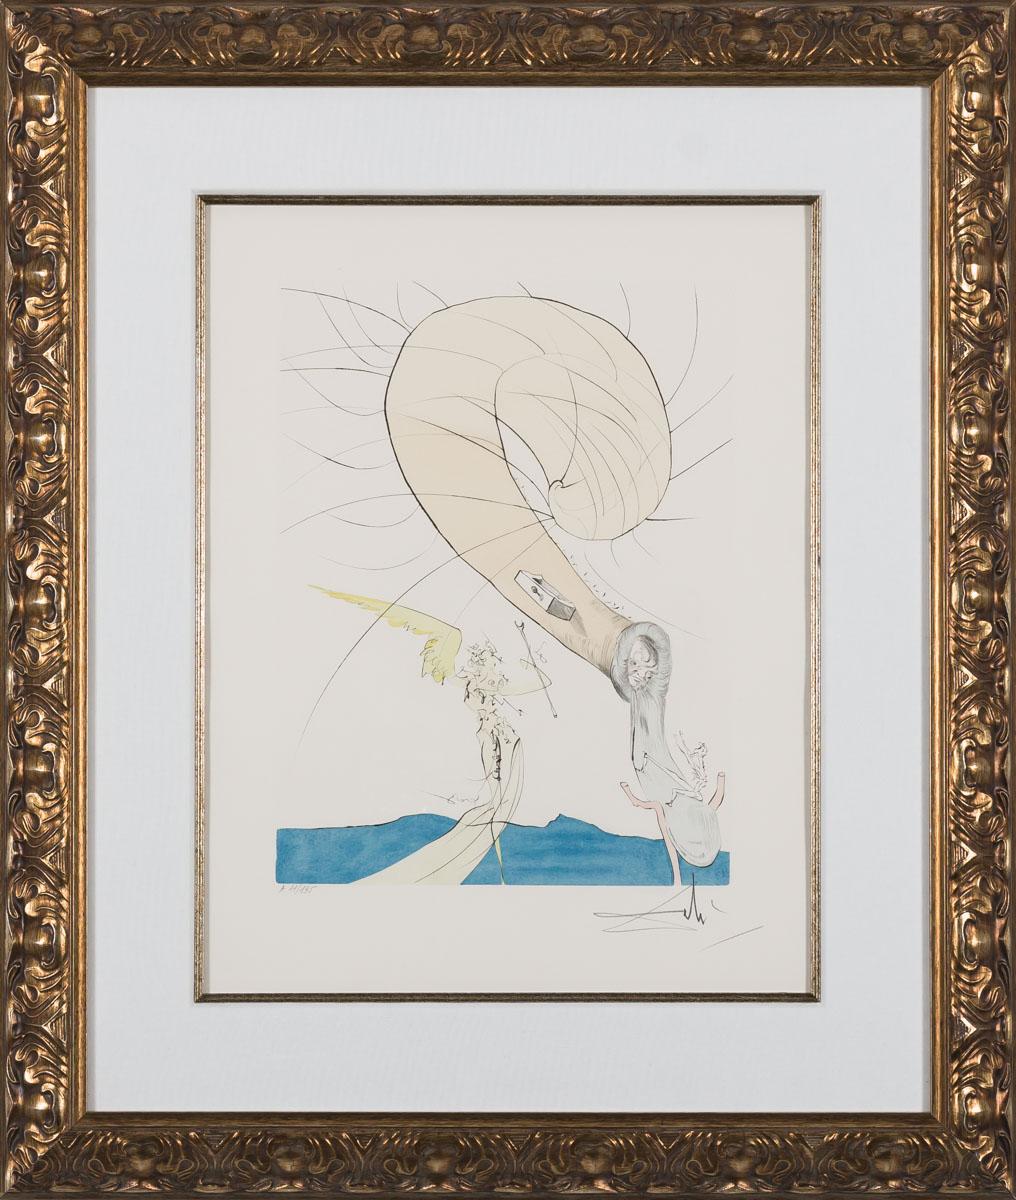 Freud with a Snail Head (Plate G), 1974 - Surrealist Print by Salvador Dalí